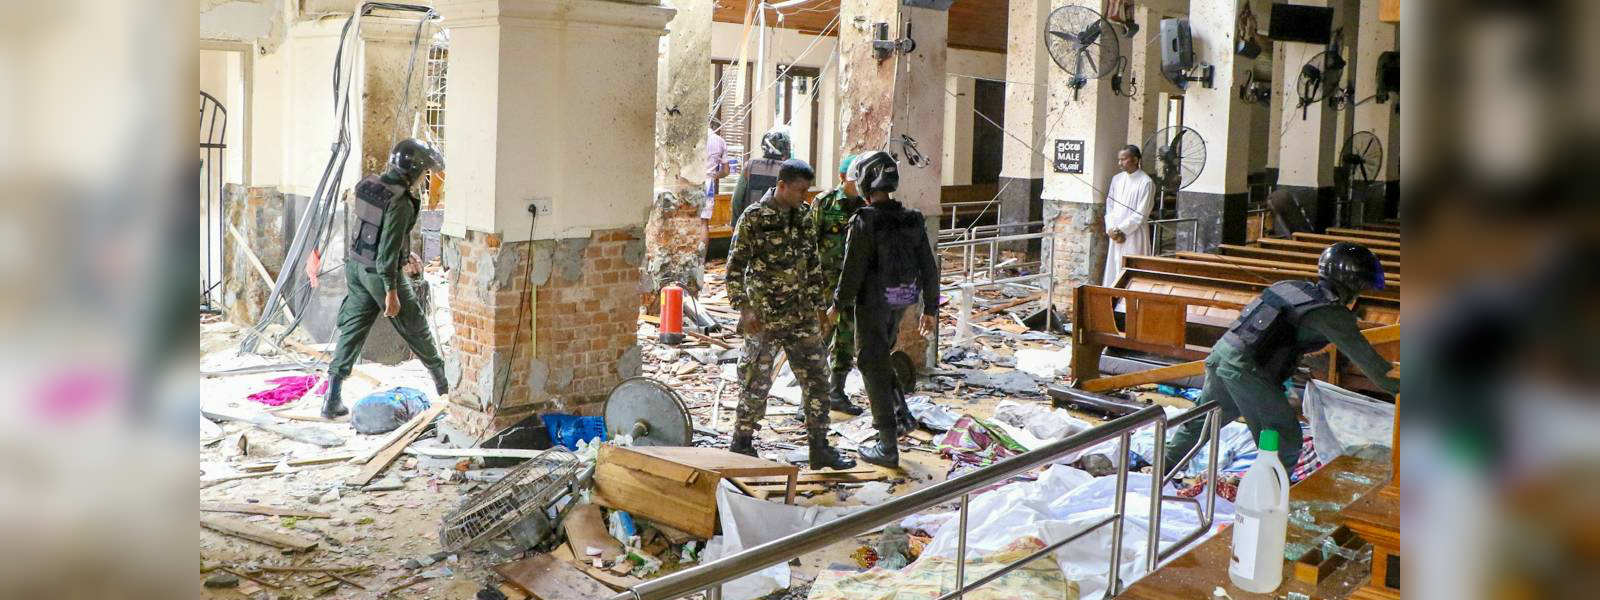 Islamic state responsible for Easter bombings